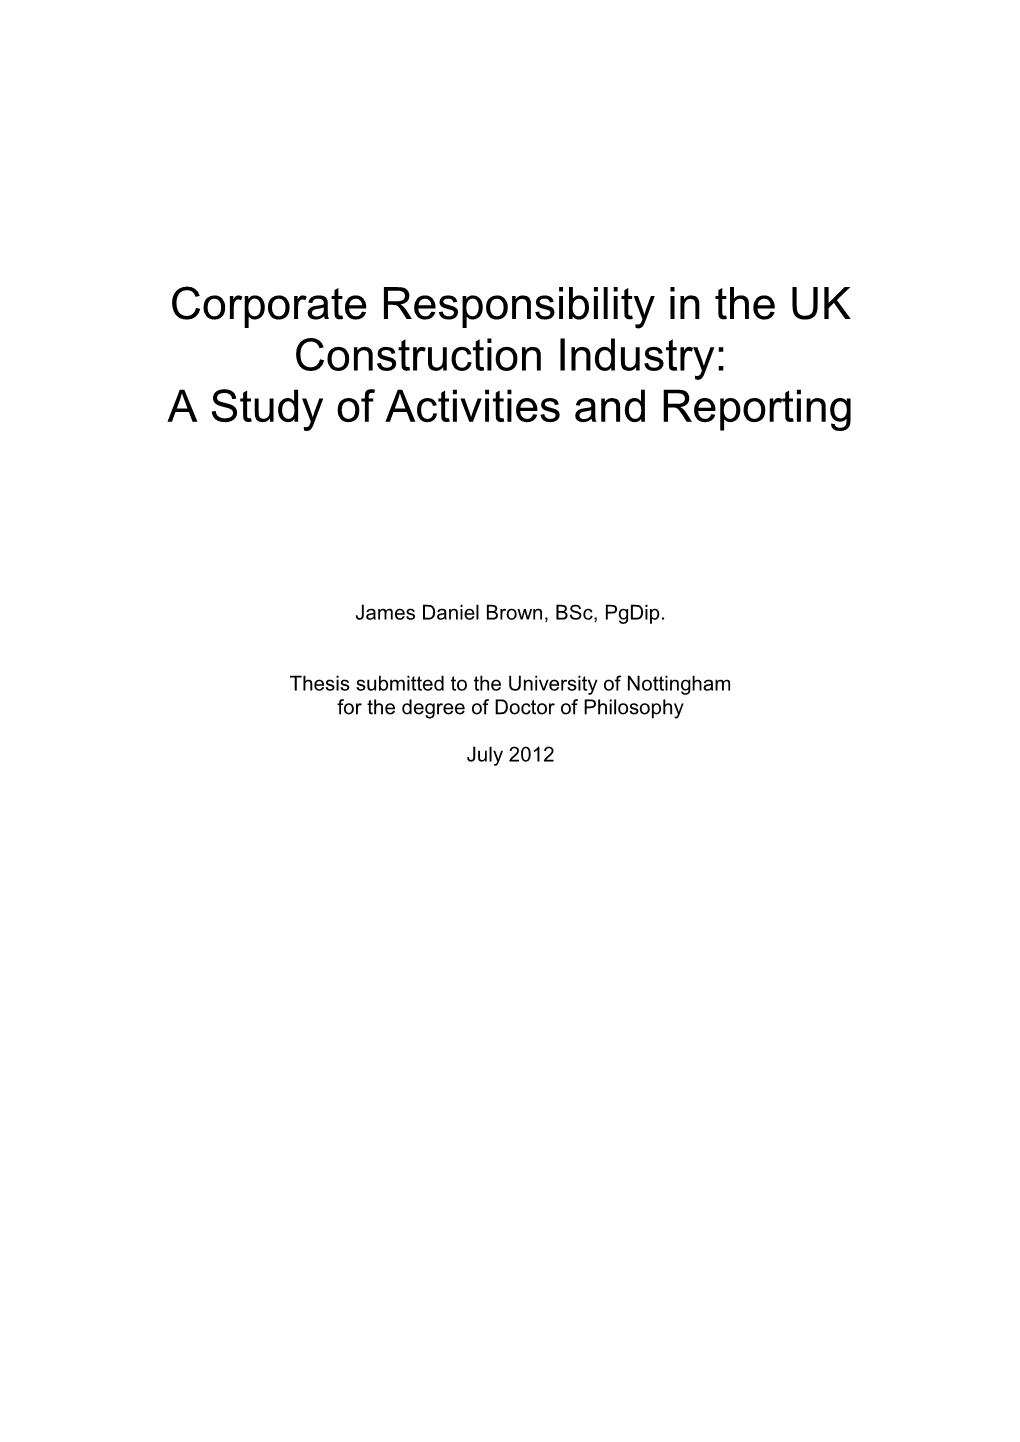 Corporate Responsibility in the UK Construction Industry: a Study of Activities and Reporting